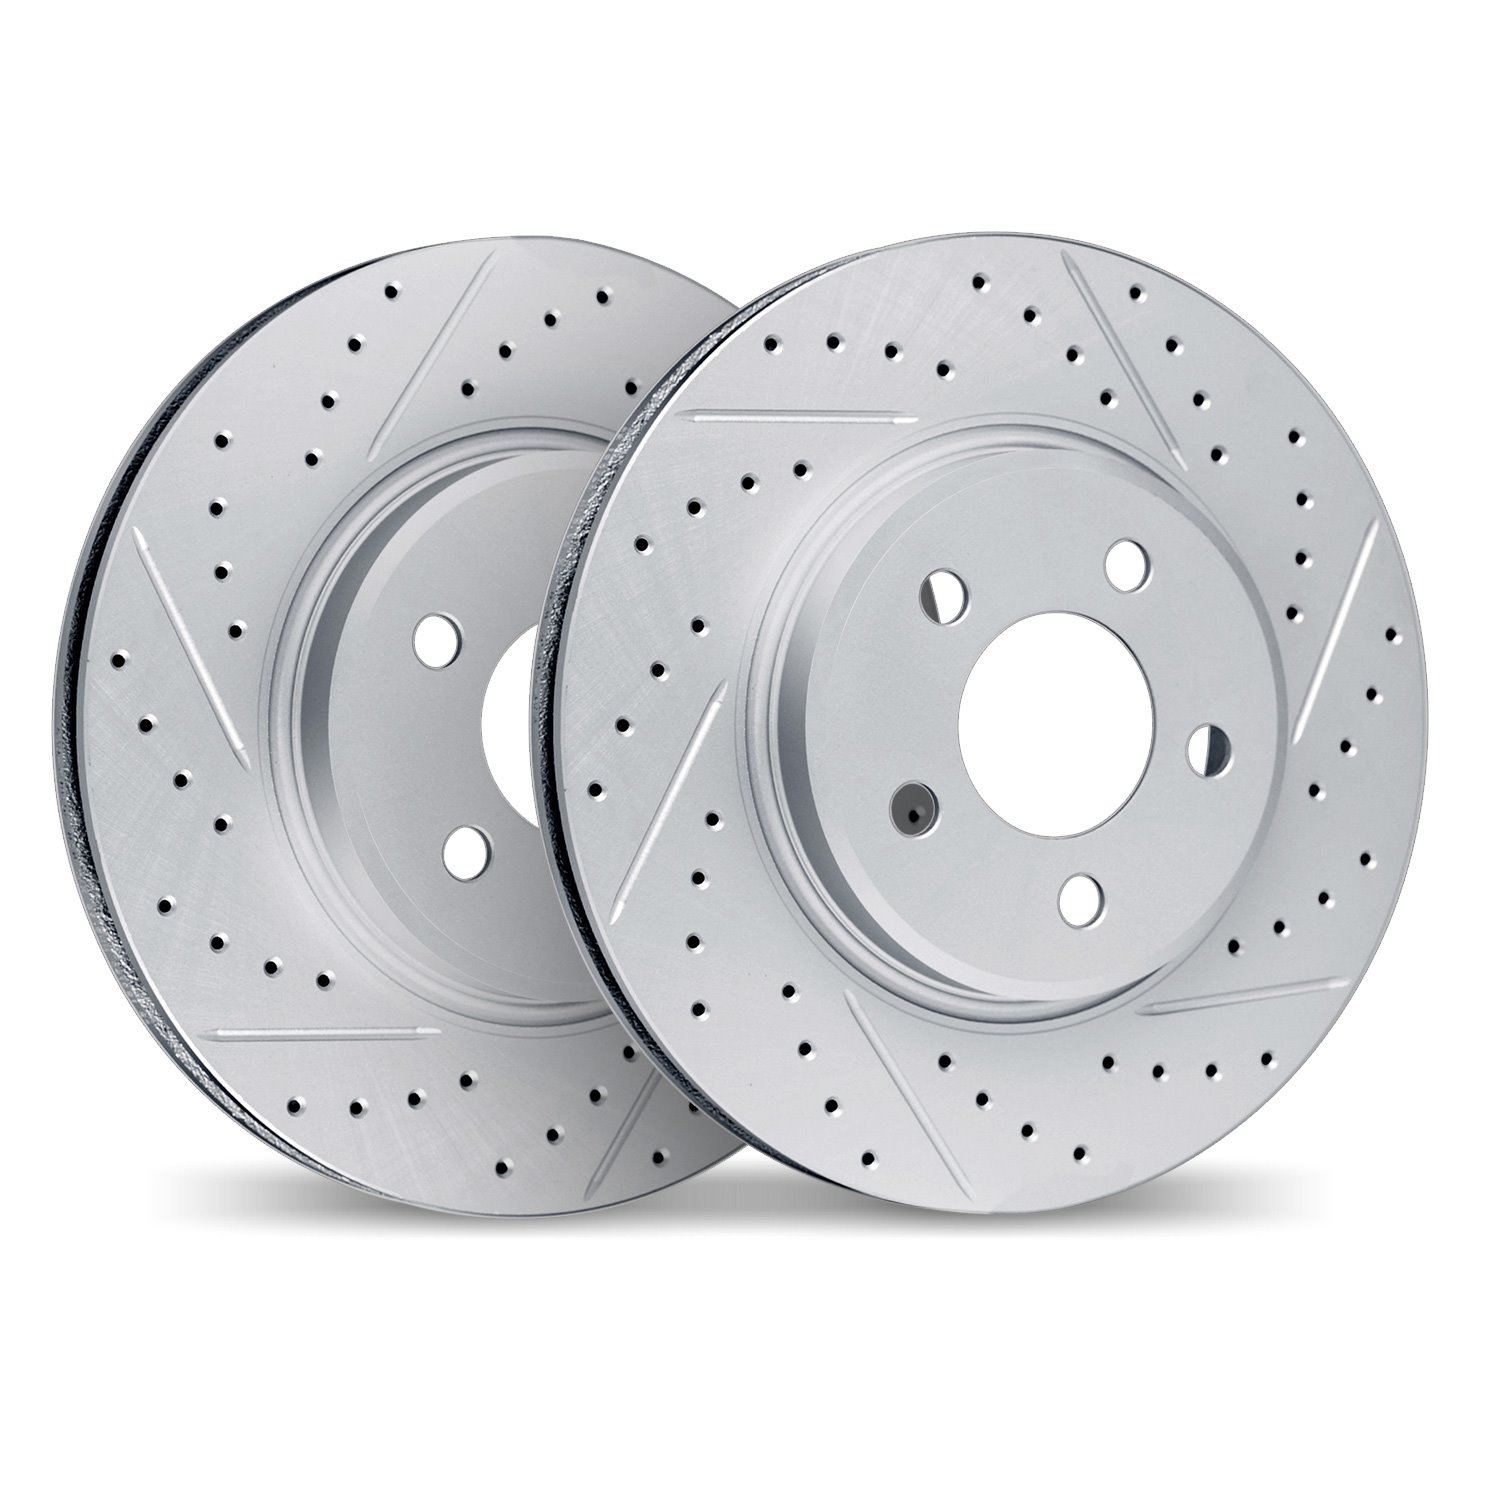 2002-48013 Geoperformance Drilled/Slotted Brake Rotors, 1991-2003 GM, Position: Front